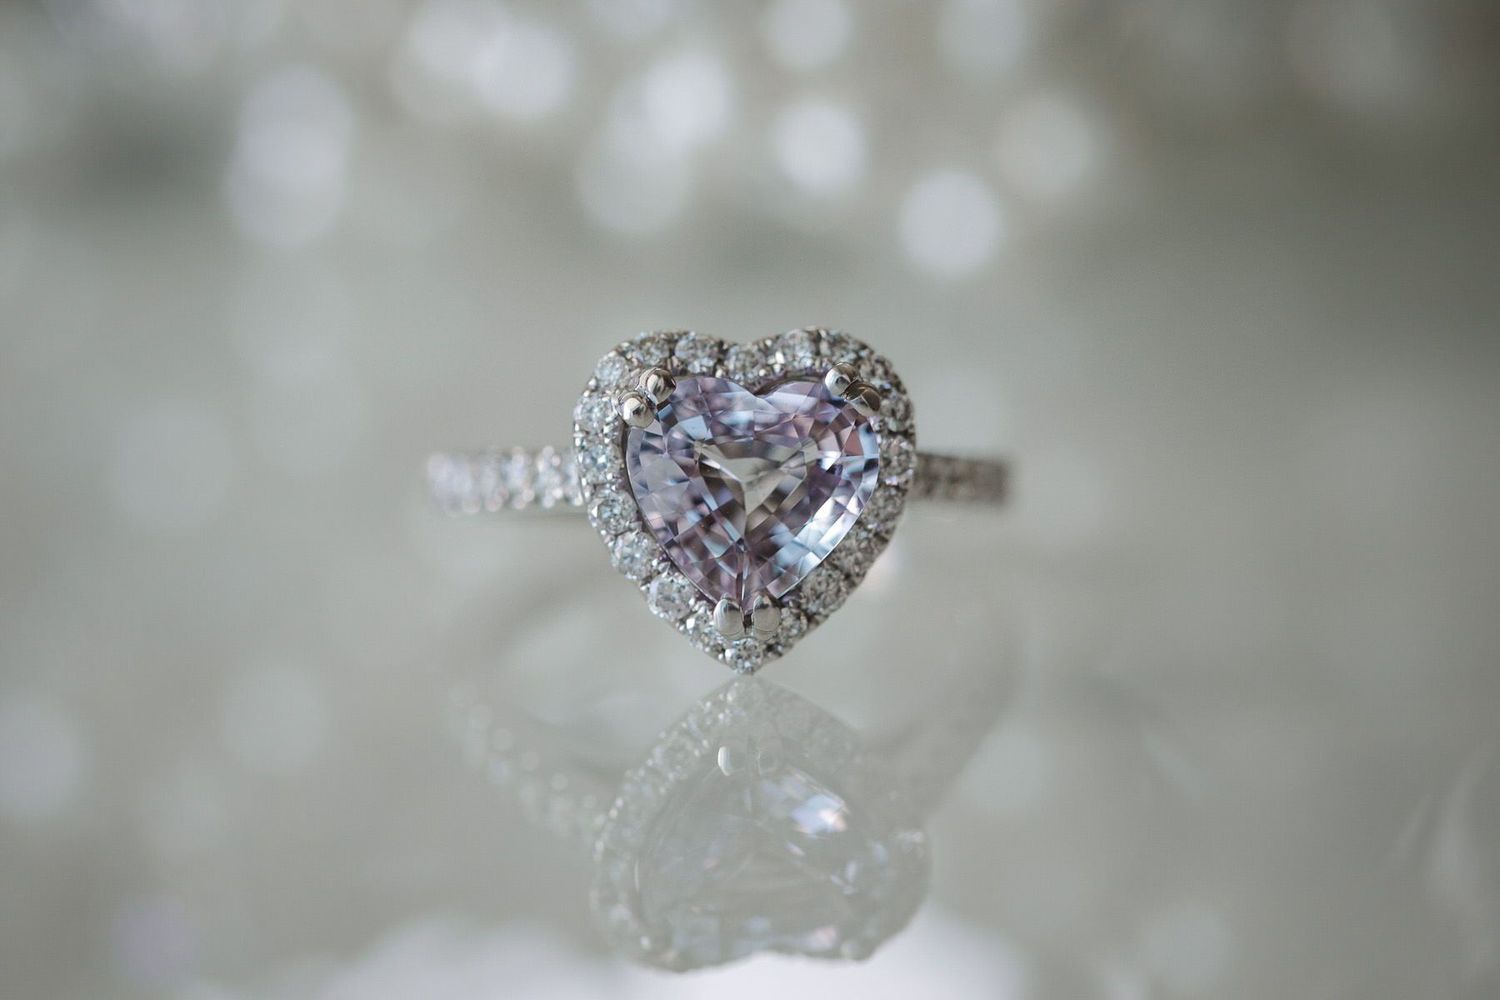 Heart-shaped engagement ring with diamond halo and diamond band